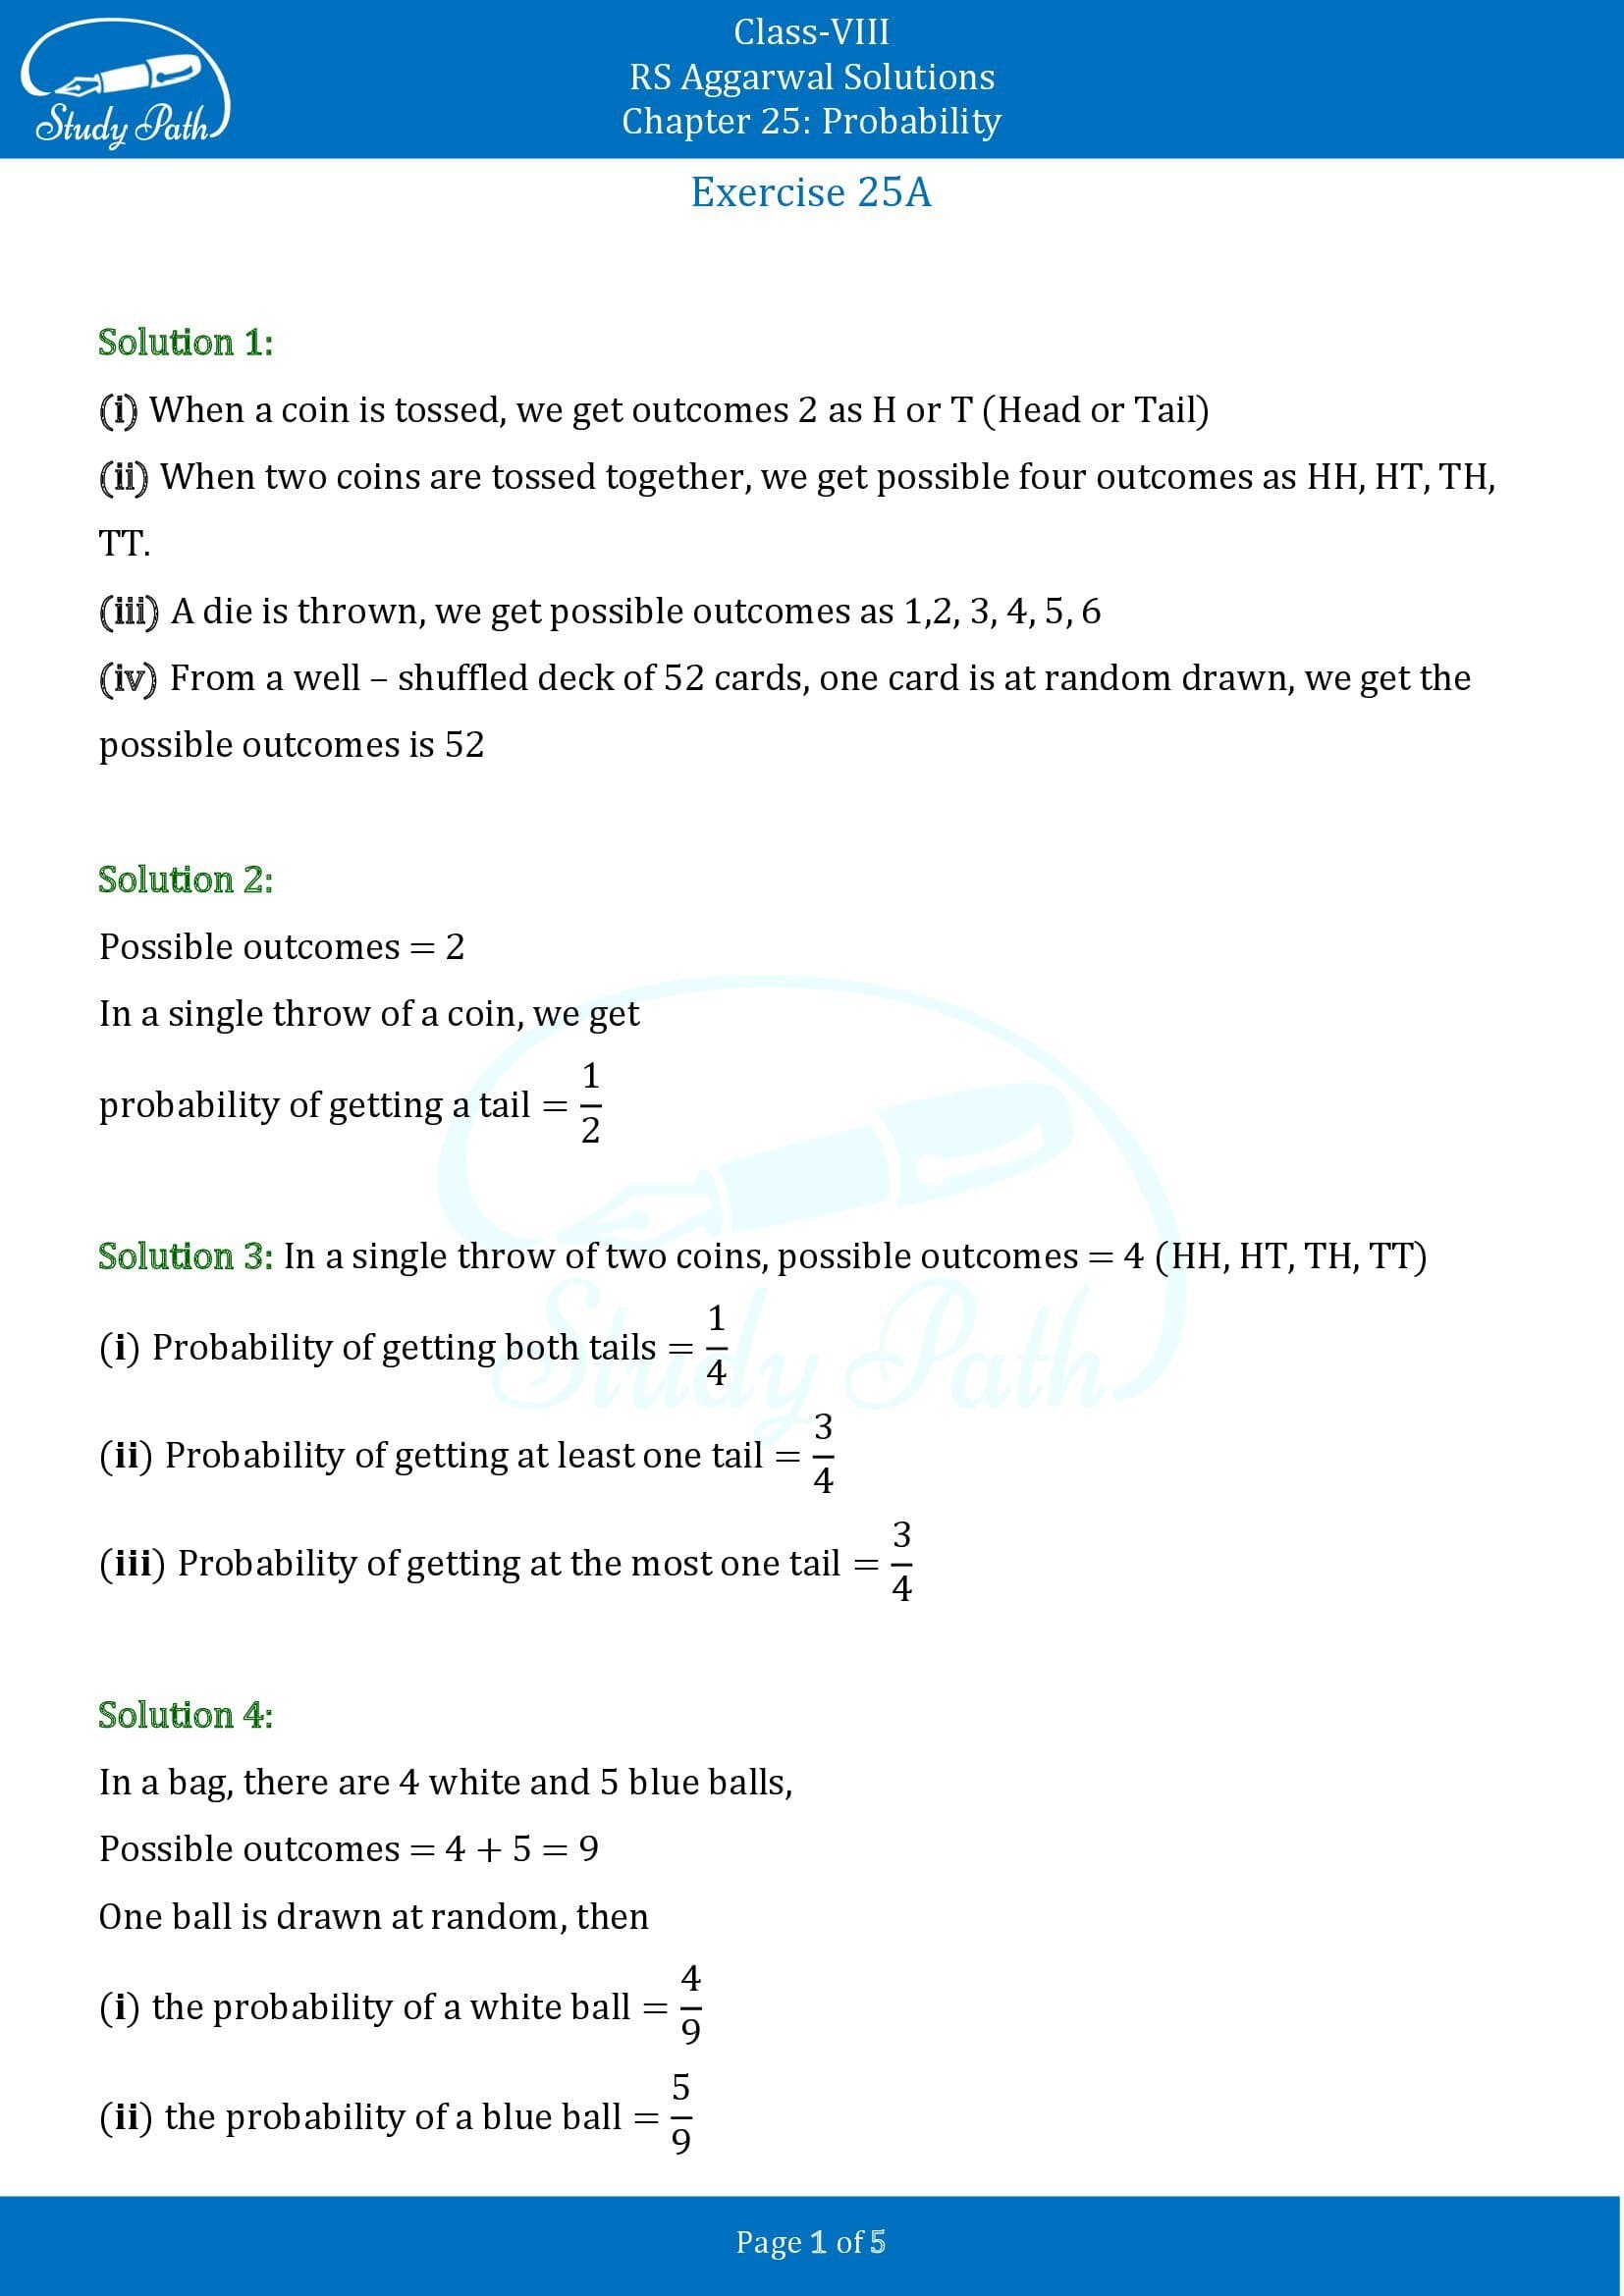 RS Aggarwal Solutions Class 8 Chapter 25 Probability Exercise 25A 00001